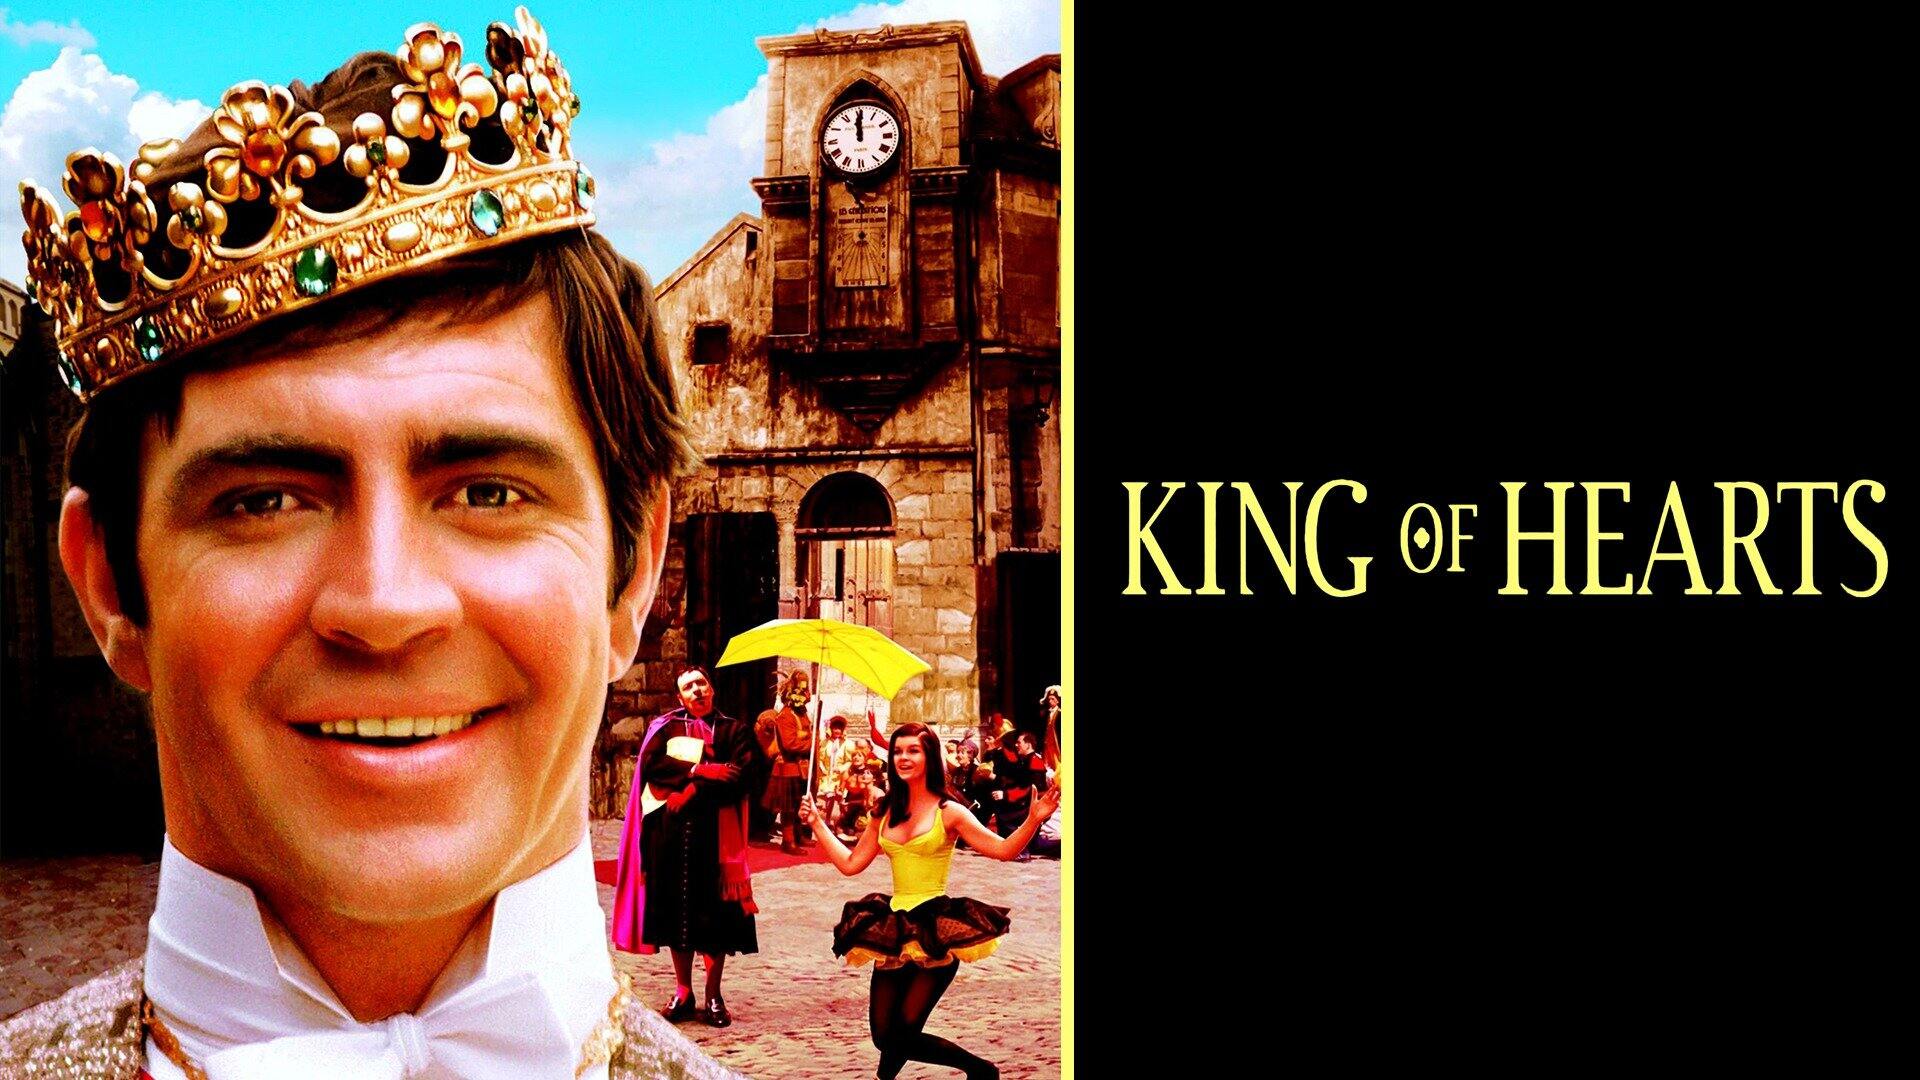 38-facts-about-the-movie-king-of-hearts